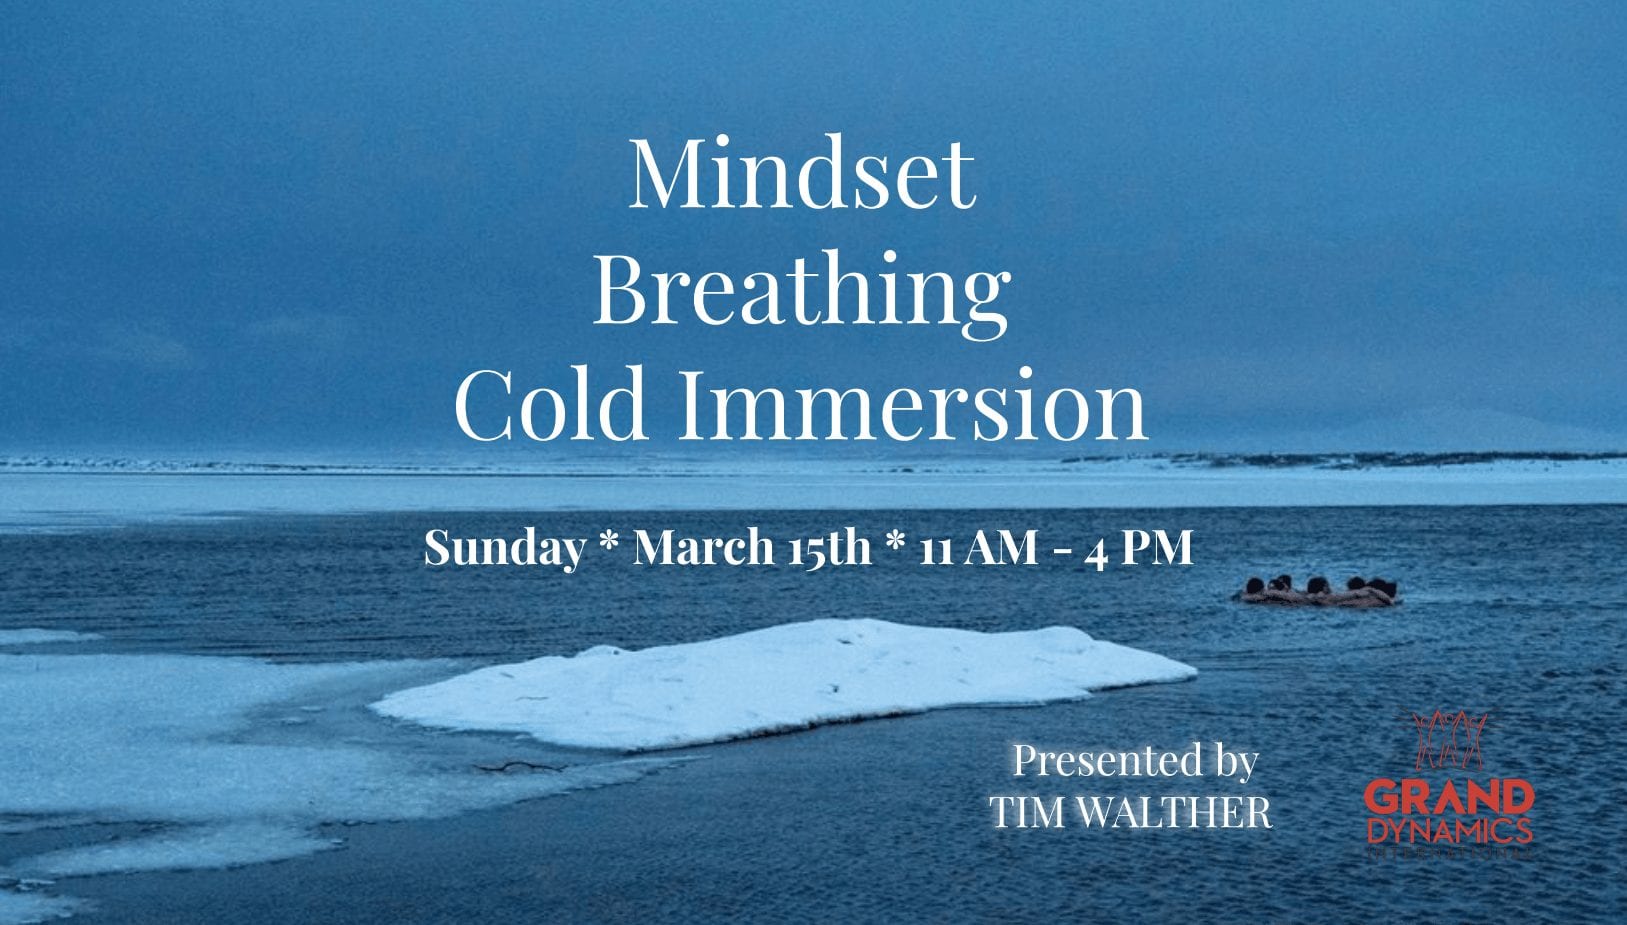 Mindset, Breathing and Cold Immersion workshop delivers powerful health benefits – by Tim Walther – March 15th 2020 – Jackson Hole, Wyoming